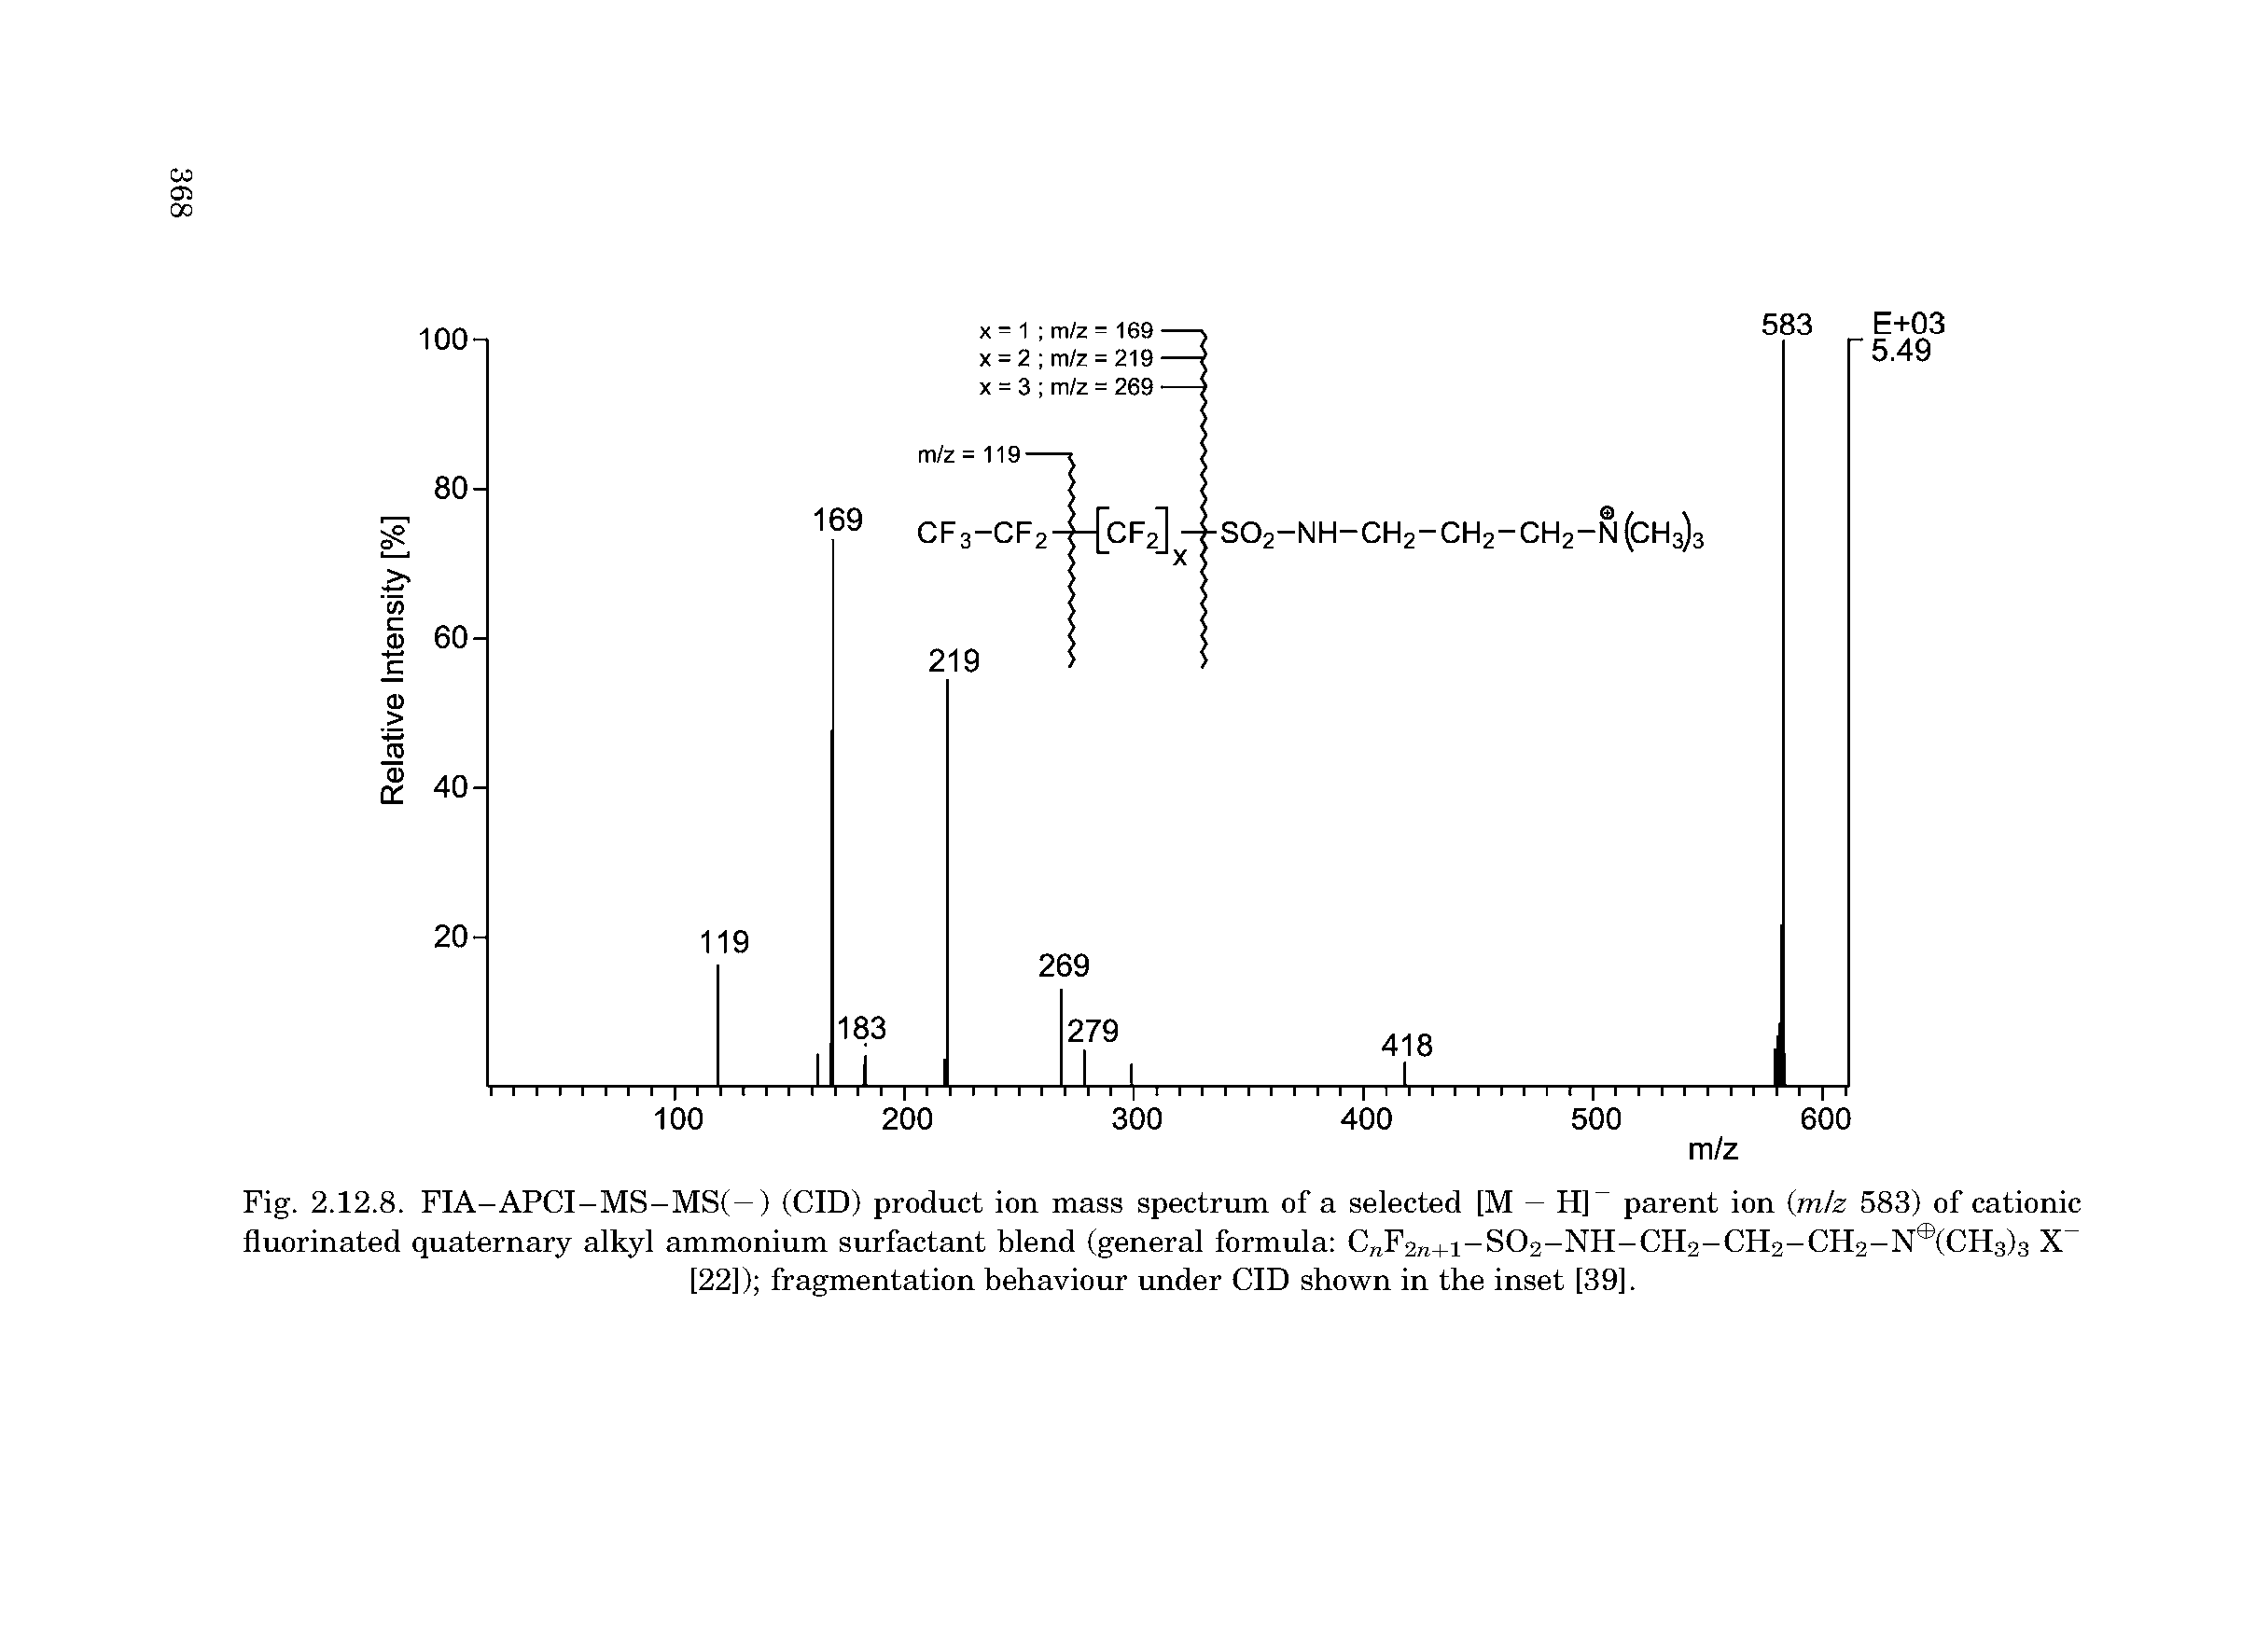 Fig. 2.12.8. FIA-APCI-MS-MS(—) (CID) product ion mass spectrum of a selected [M — H] parent ion (mlz 583) of cationic fluorinated quaternary alkyl ammonium surfactant blend (general formula CnF2n+i- S02-NH-CH2-CH2-CH2-N (CH3)3 x ...